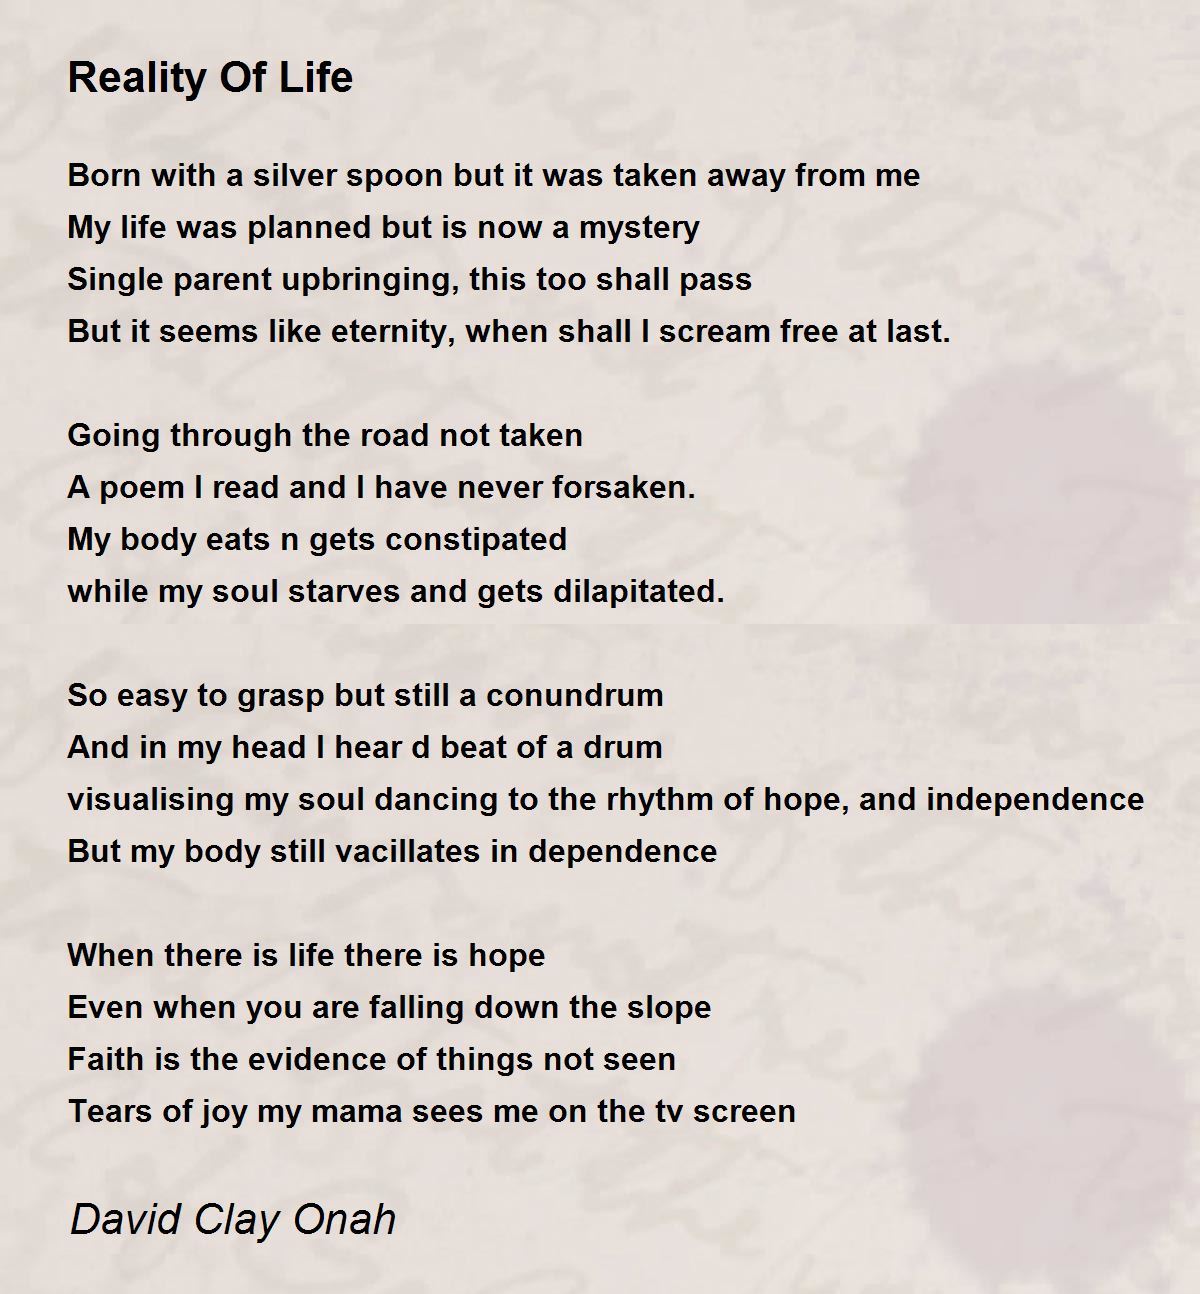 Reality Of Life - Reality Of Life Poem by David Clay Onah